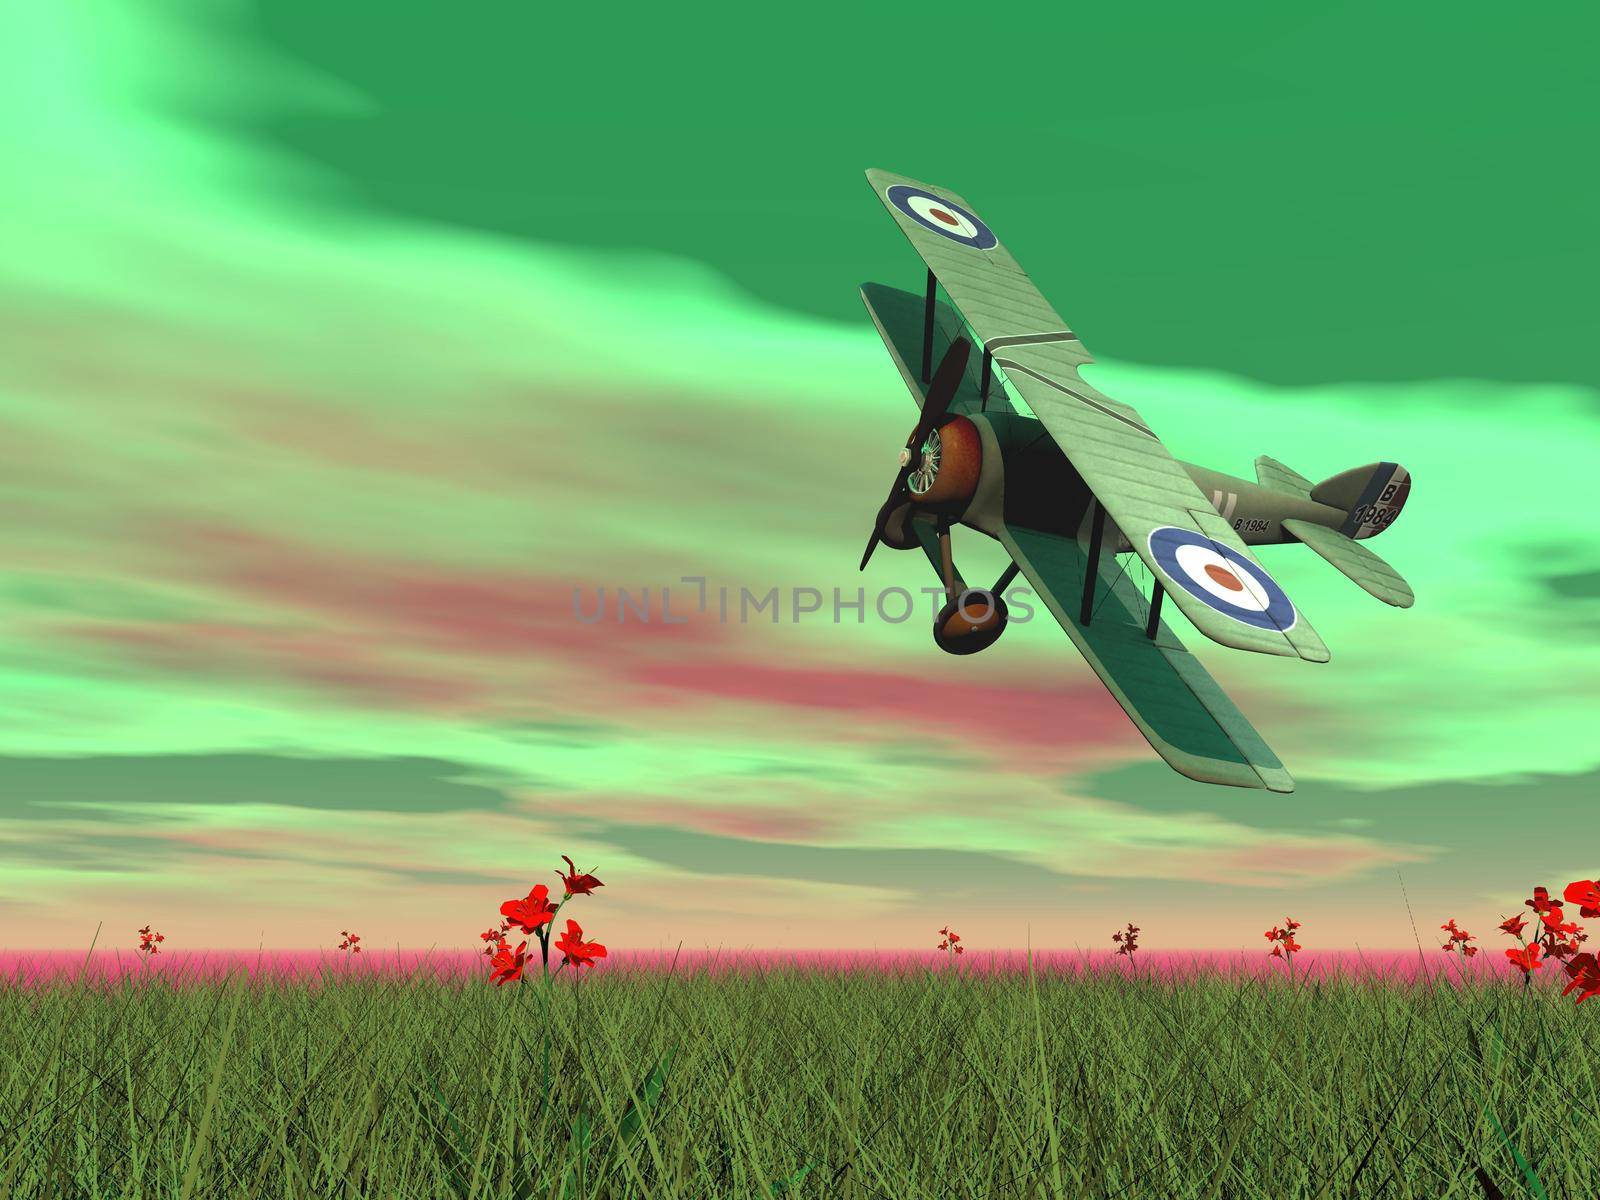 Vintage biplane flying upon the green grass with flowers by sunset